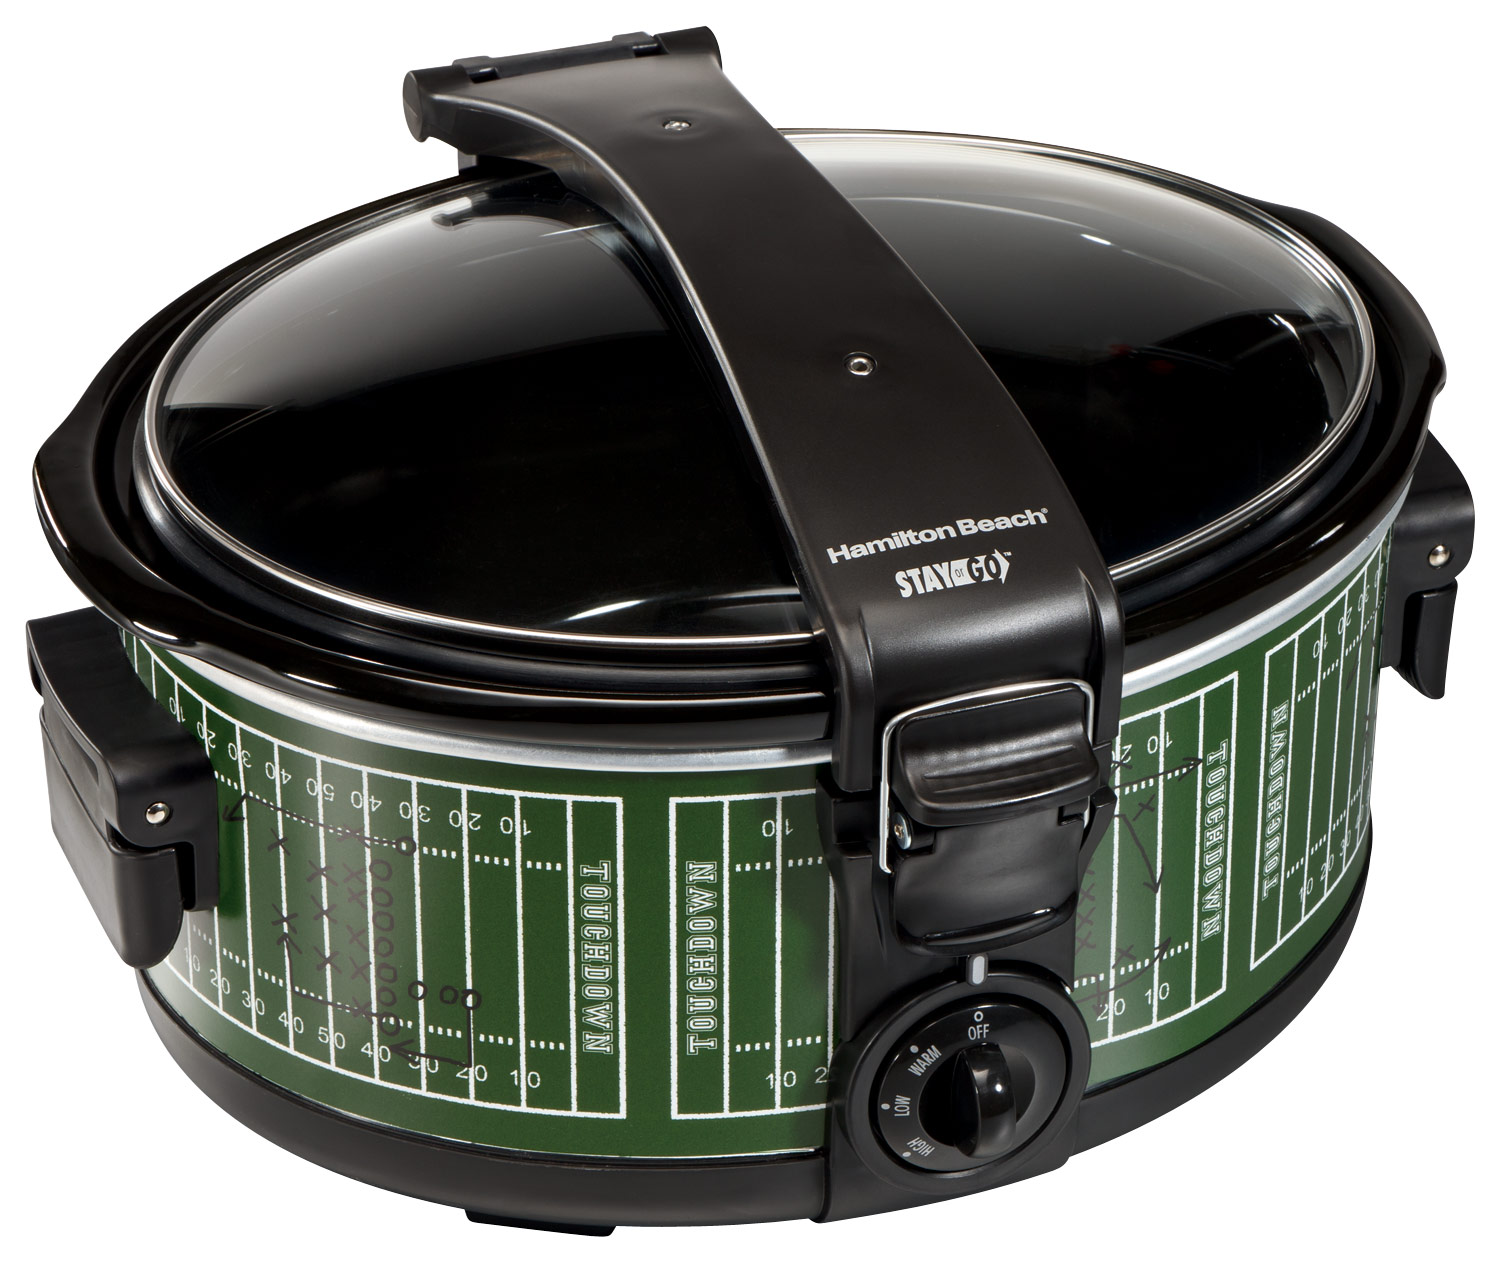 Best Buy: Hamilton Beach Stay or Go 6-Quart Slow Cooker Silver 33162R